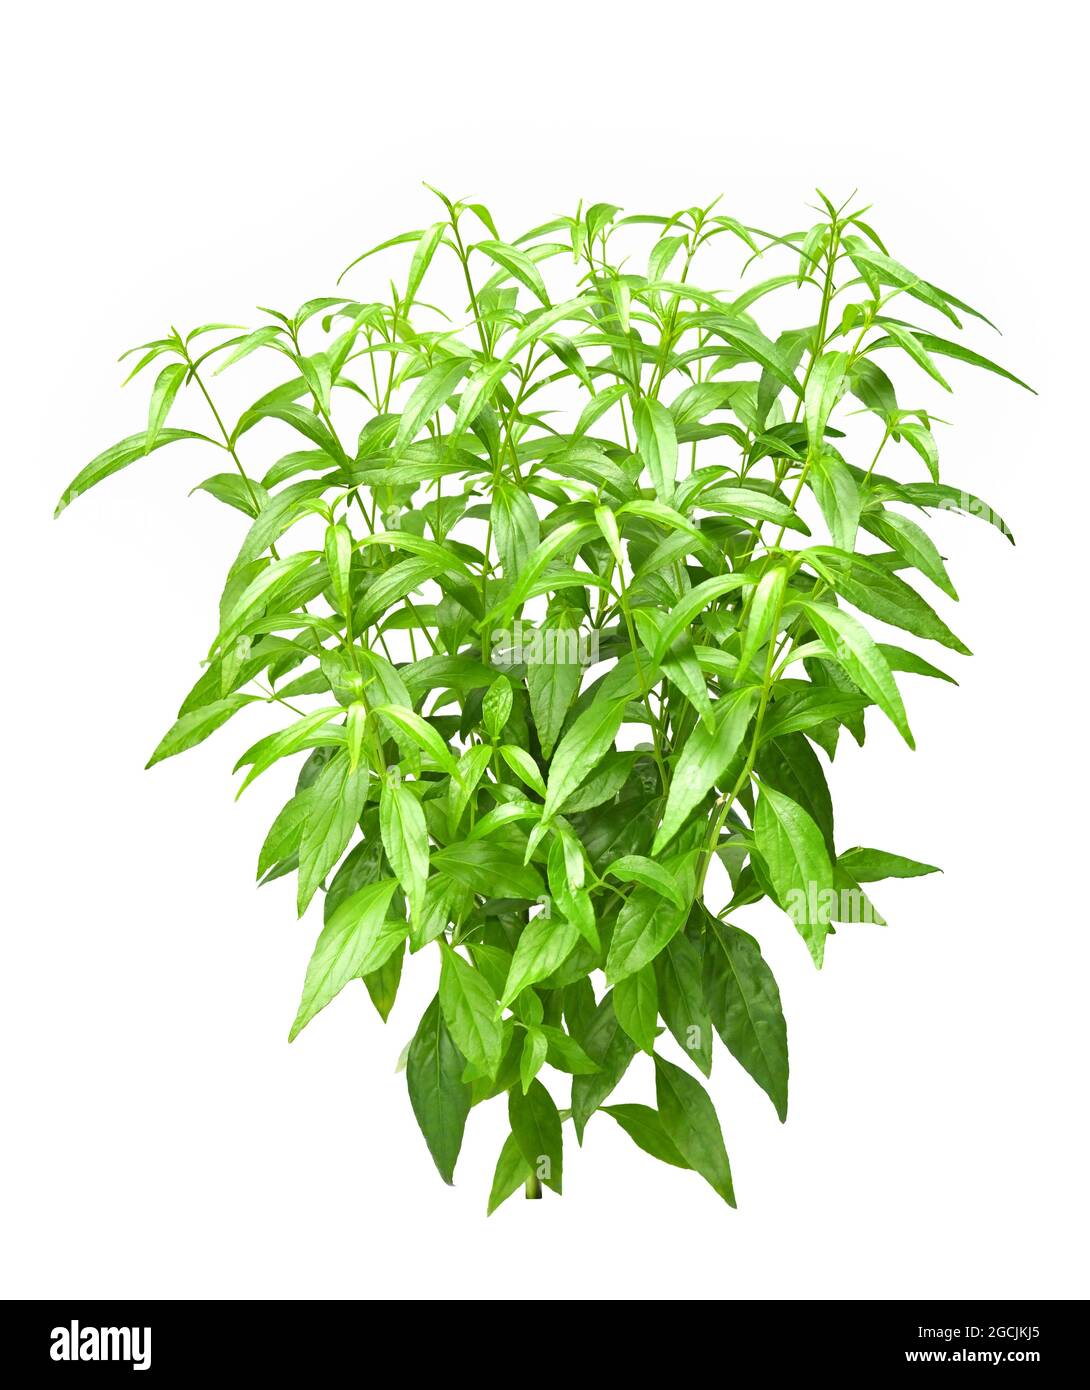 Fresh organic Andrographis paniculata or green chiretta plant. For use as medicinal herb. Isolated on white background Stock Photo